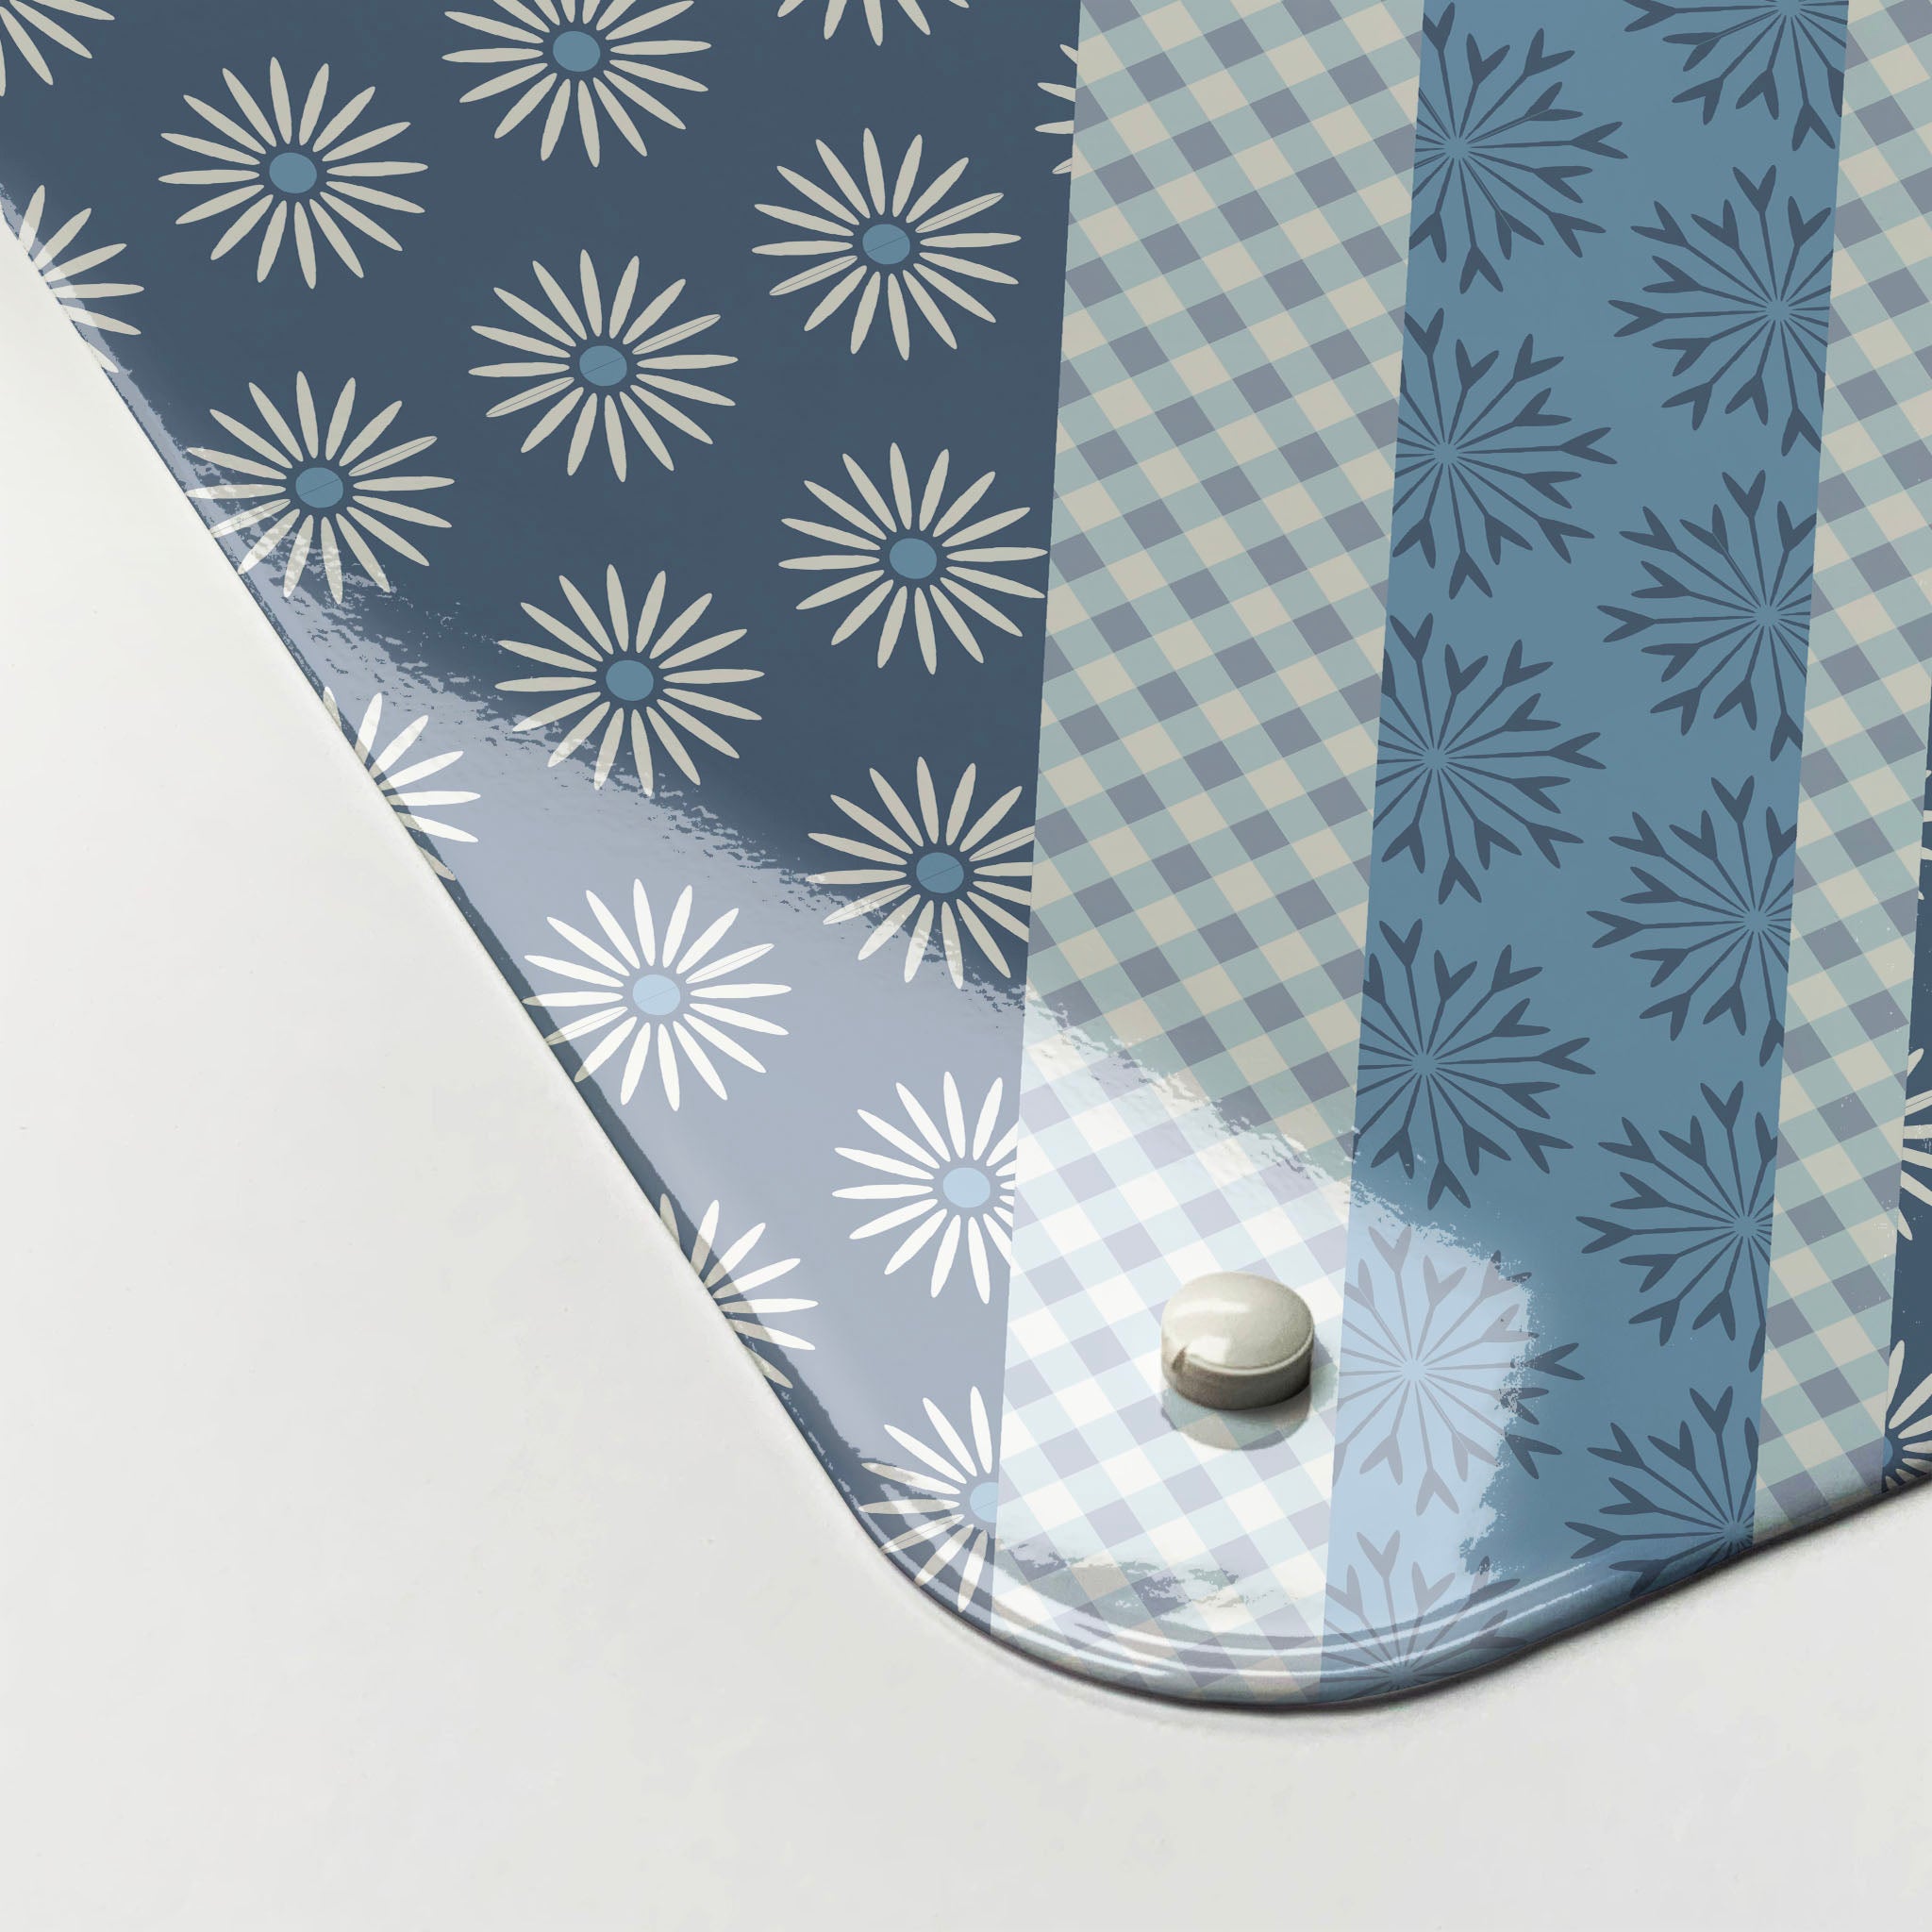 The corner detail of a Cool Britannia blue and white design magnetic board to show it’s high gloss surface